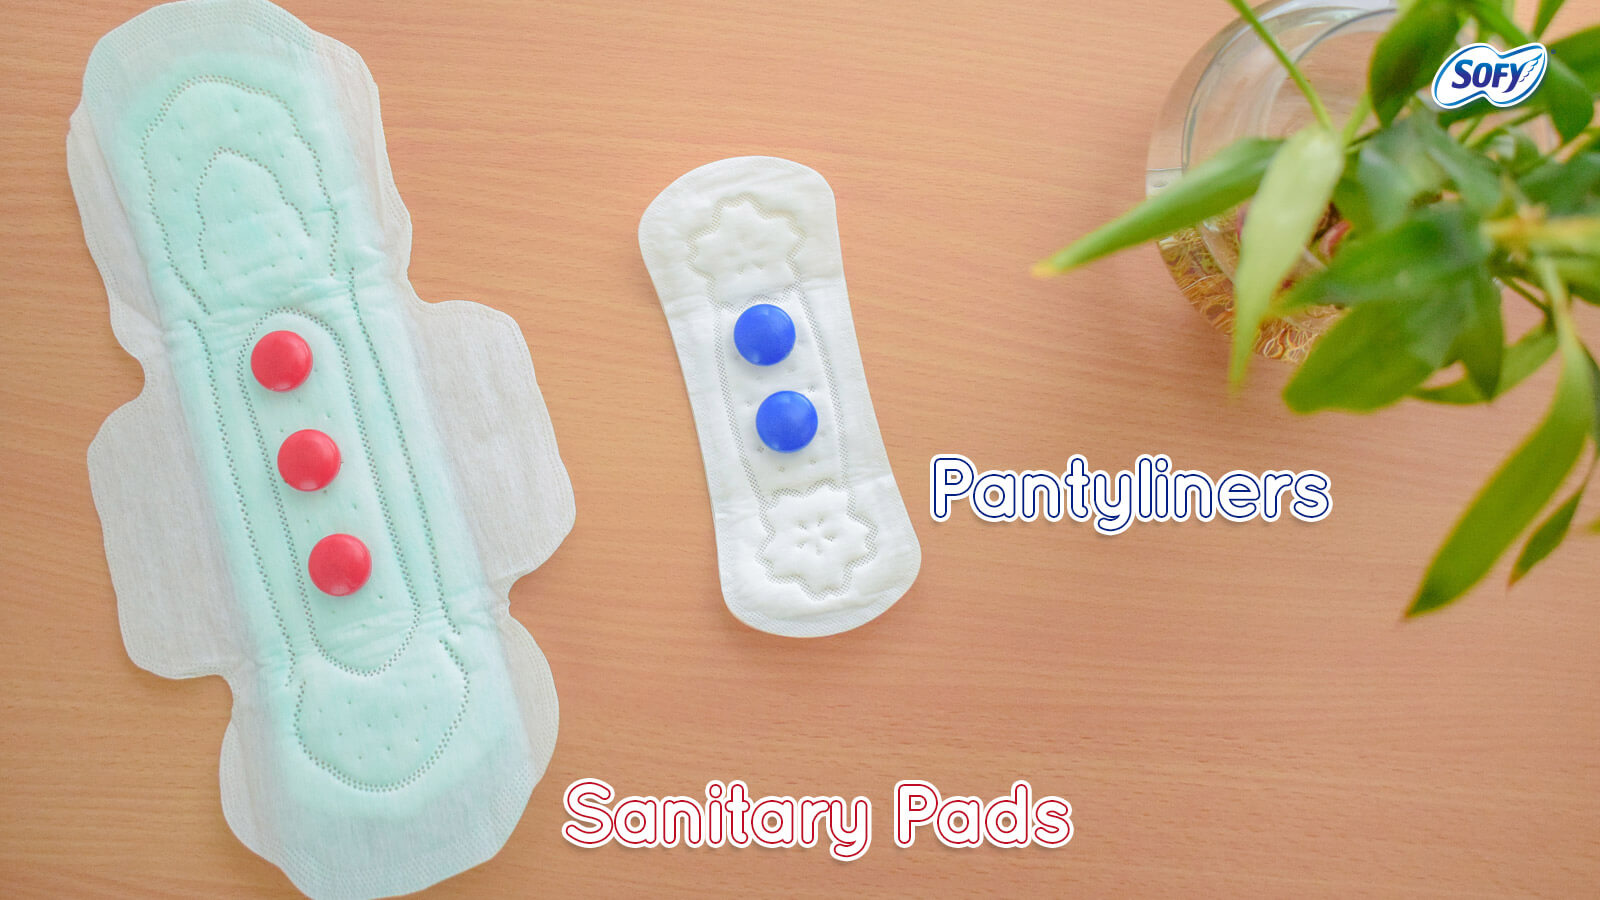 https://www.sofy.in/wp-content/uploads/2019/02/Pads-Pantyliners-How-They-Are-Different-2.jpg